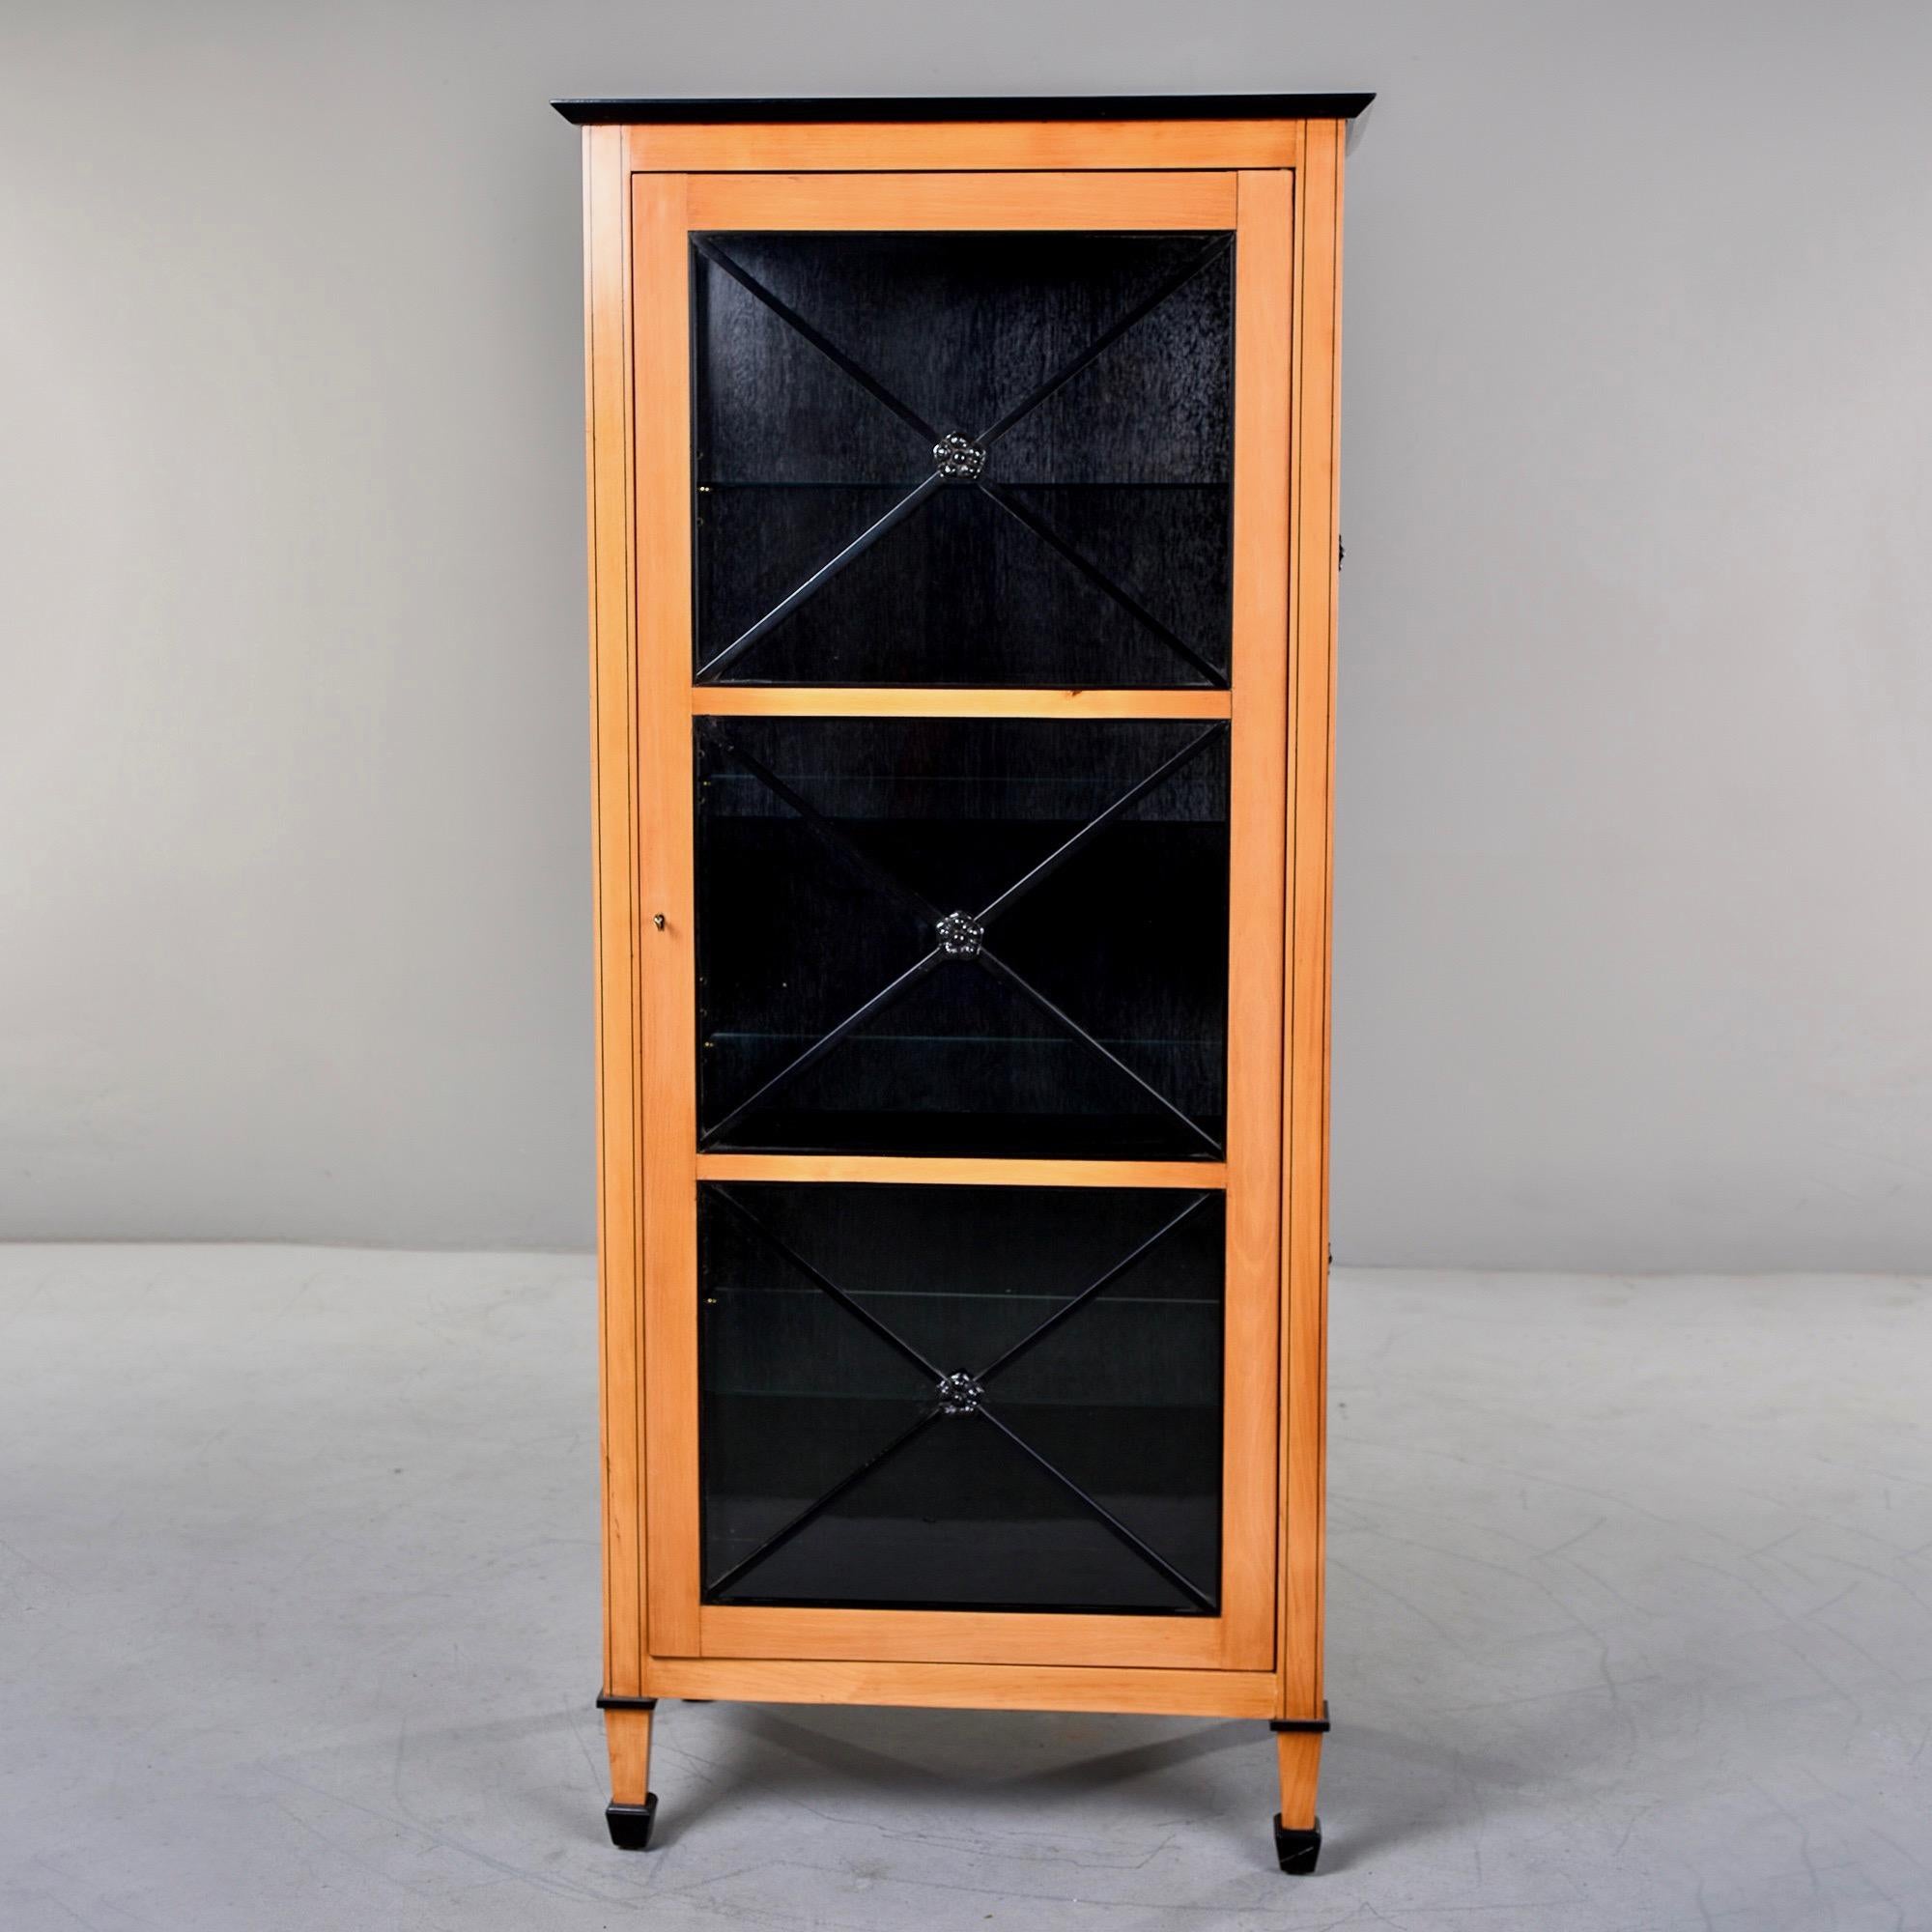 Tall Art Deco-inspired cabinet glass front door in maple with ebonised trim. Internal shelves, hand crafted to our specifications in England by custom cabinet makers. 32” wide and 19” deep including crown molding; body itself 30” wide and 18” deep.